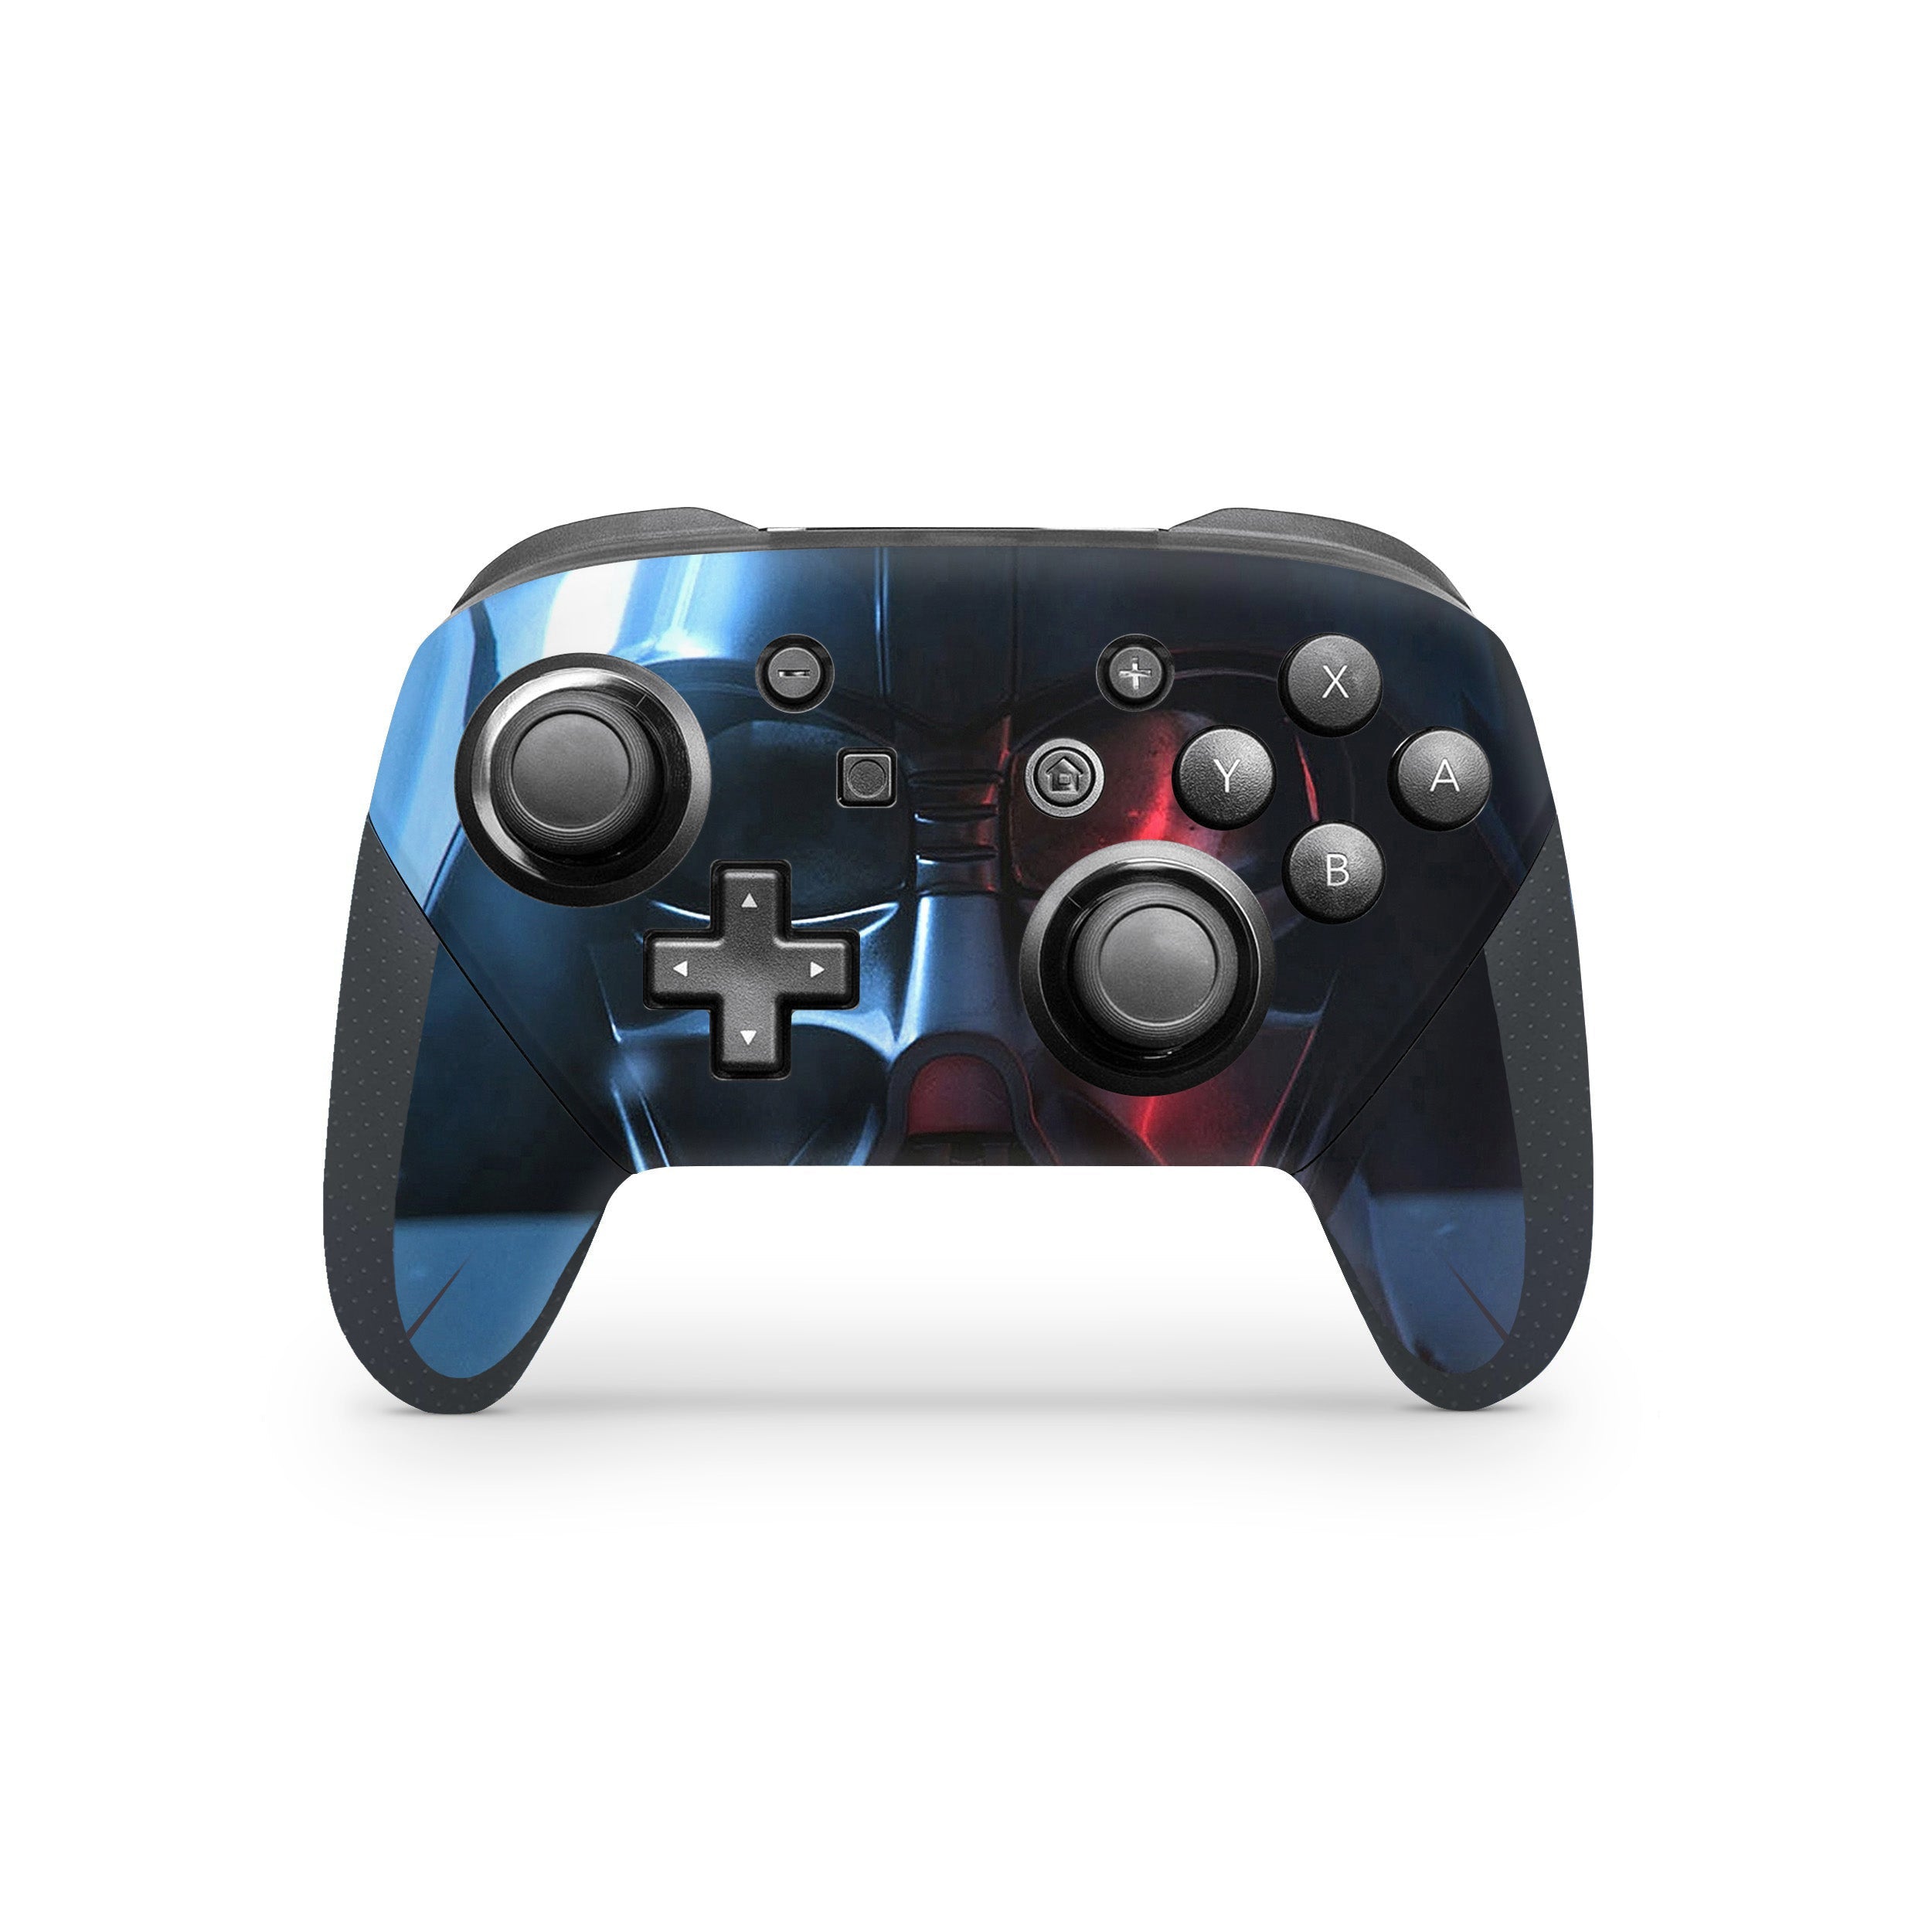 A video game skin featuring a Star Wars Darth Vader design for the Switch Pro Controller.